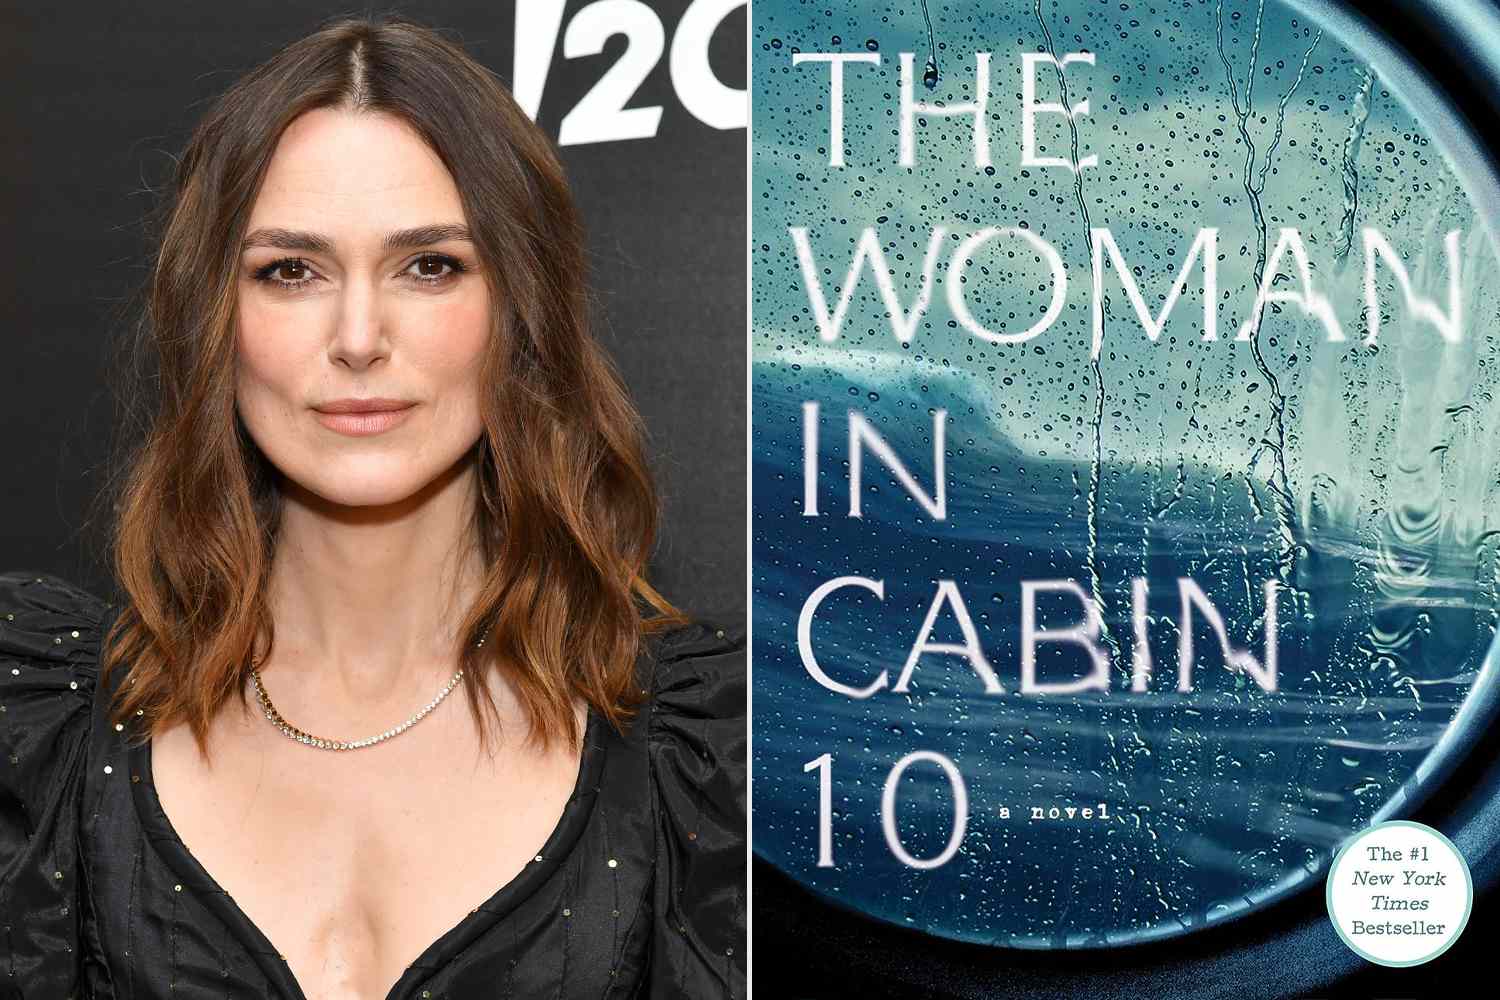 Keira Knightley to Star in Movie Adaptation of “The Woman in Cabin 10” Novel by Ruth Ware